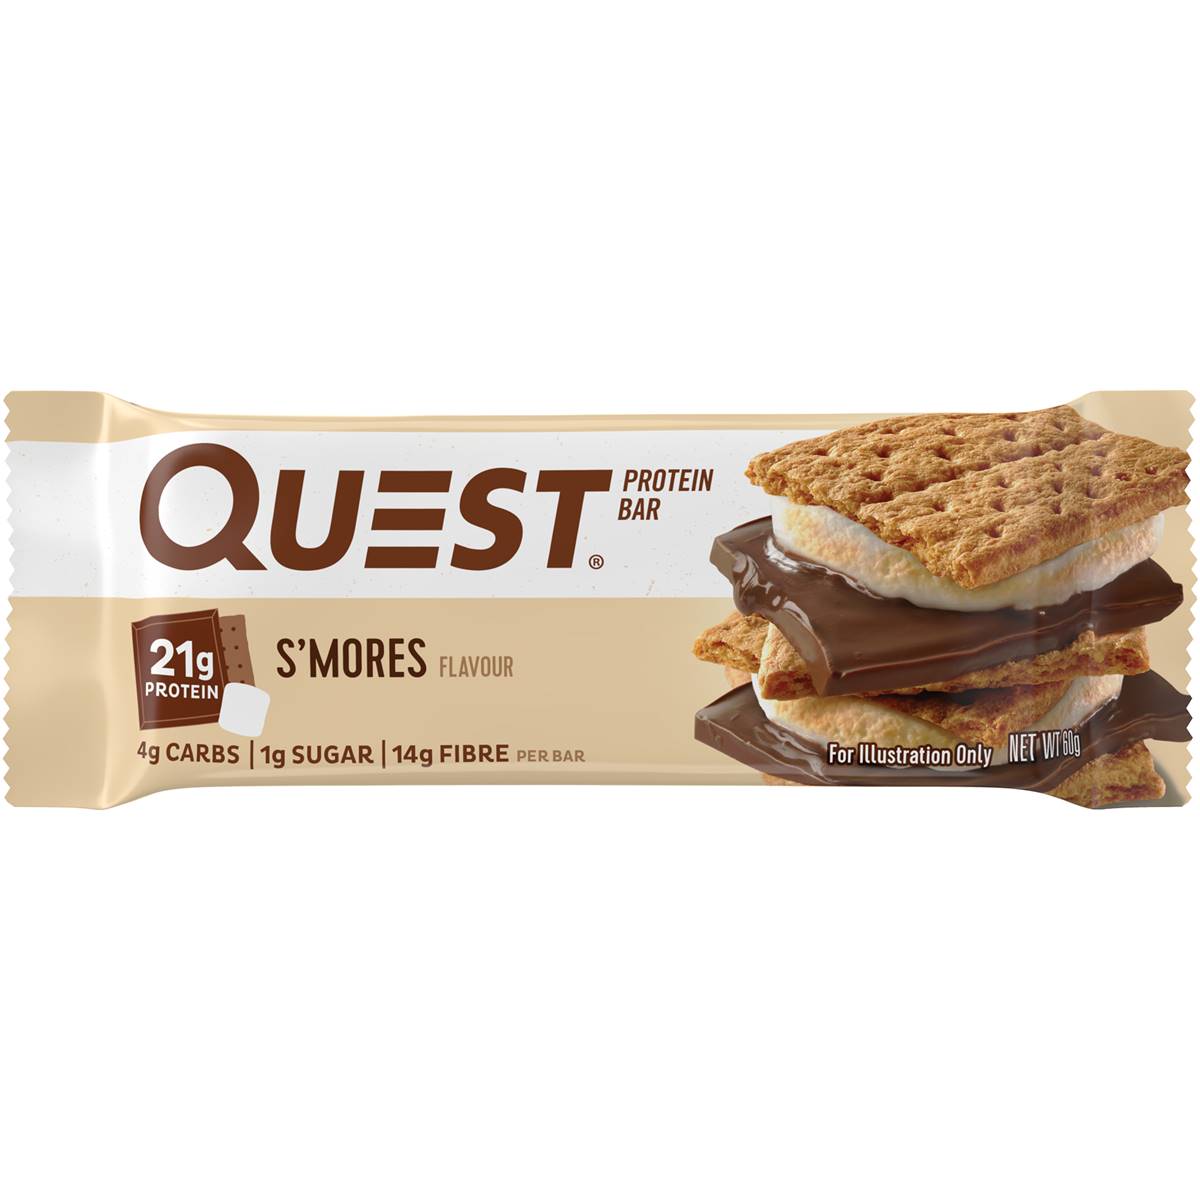 Calories in Quest Protein Bar Smores